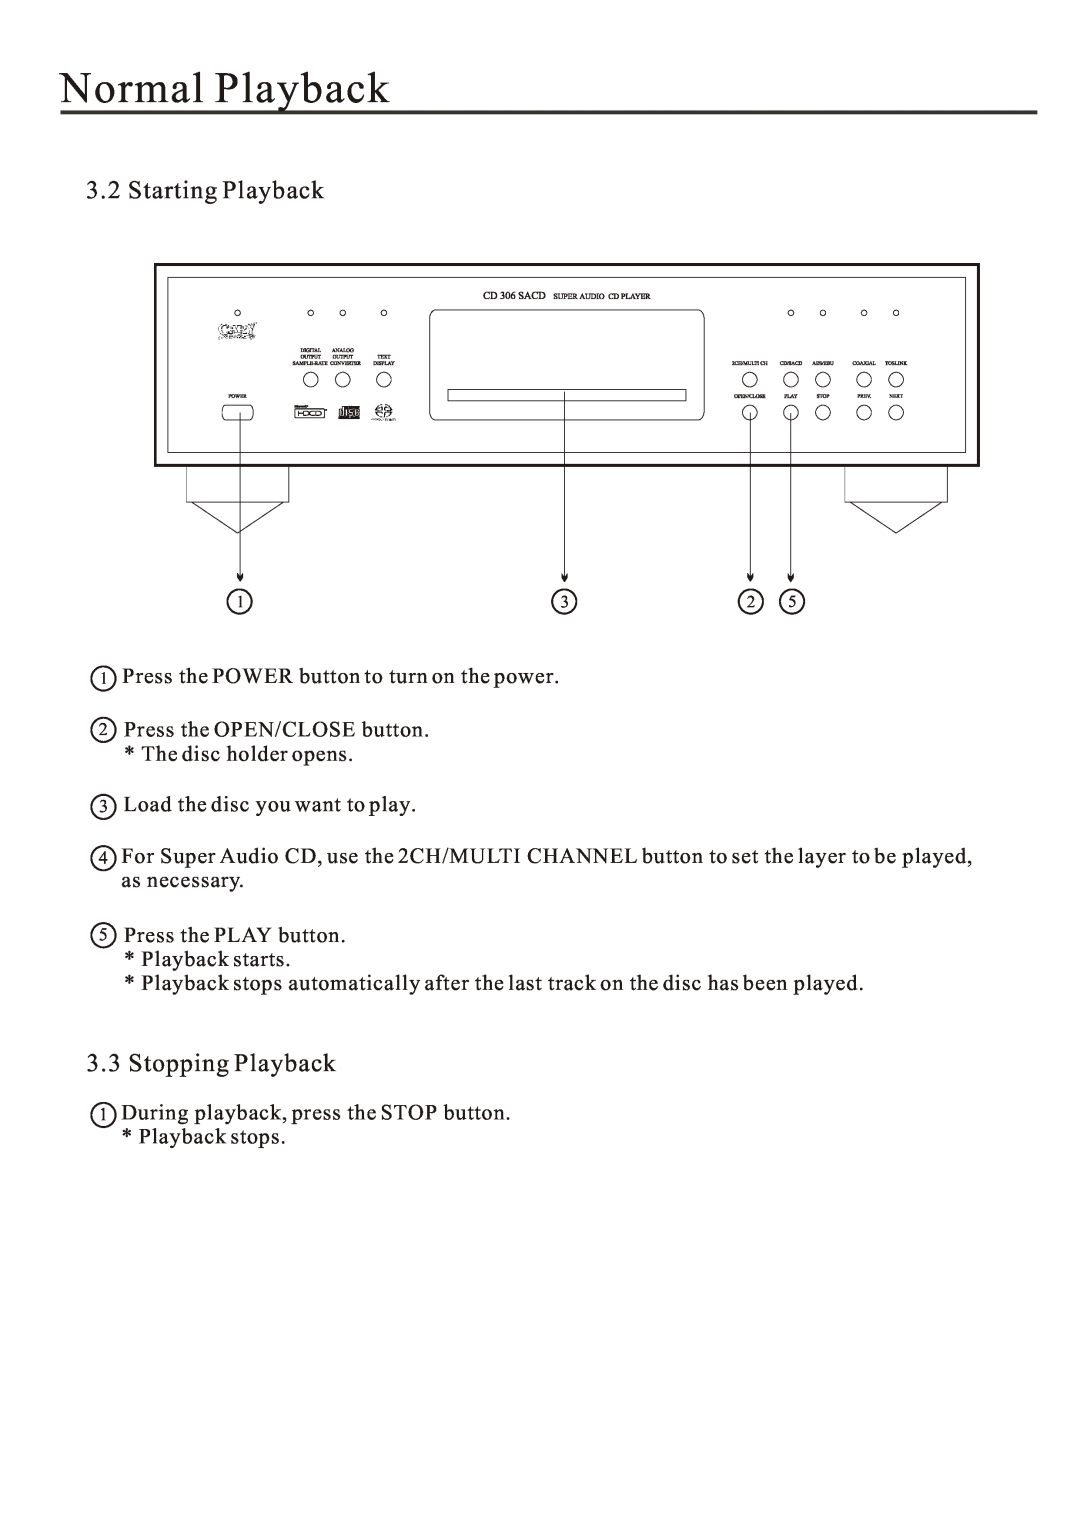 Cary Audio Design Audio CD Player owner manual Normal Playback, Starting Playback, 3.3Stopping Playback 